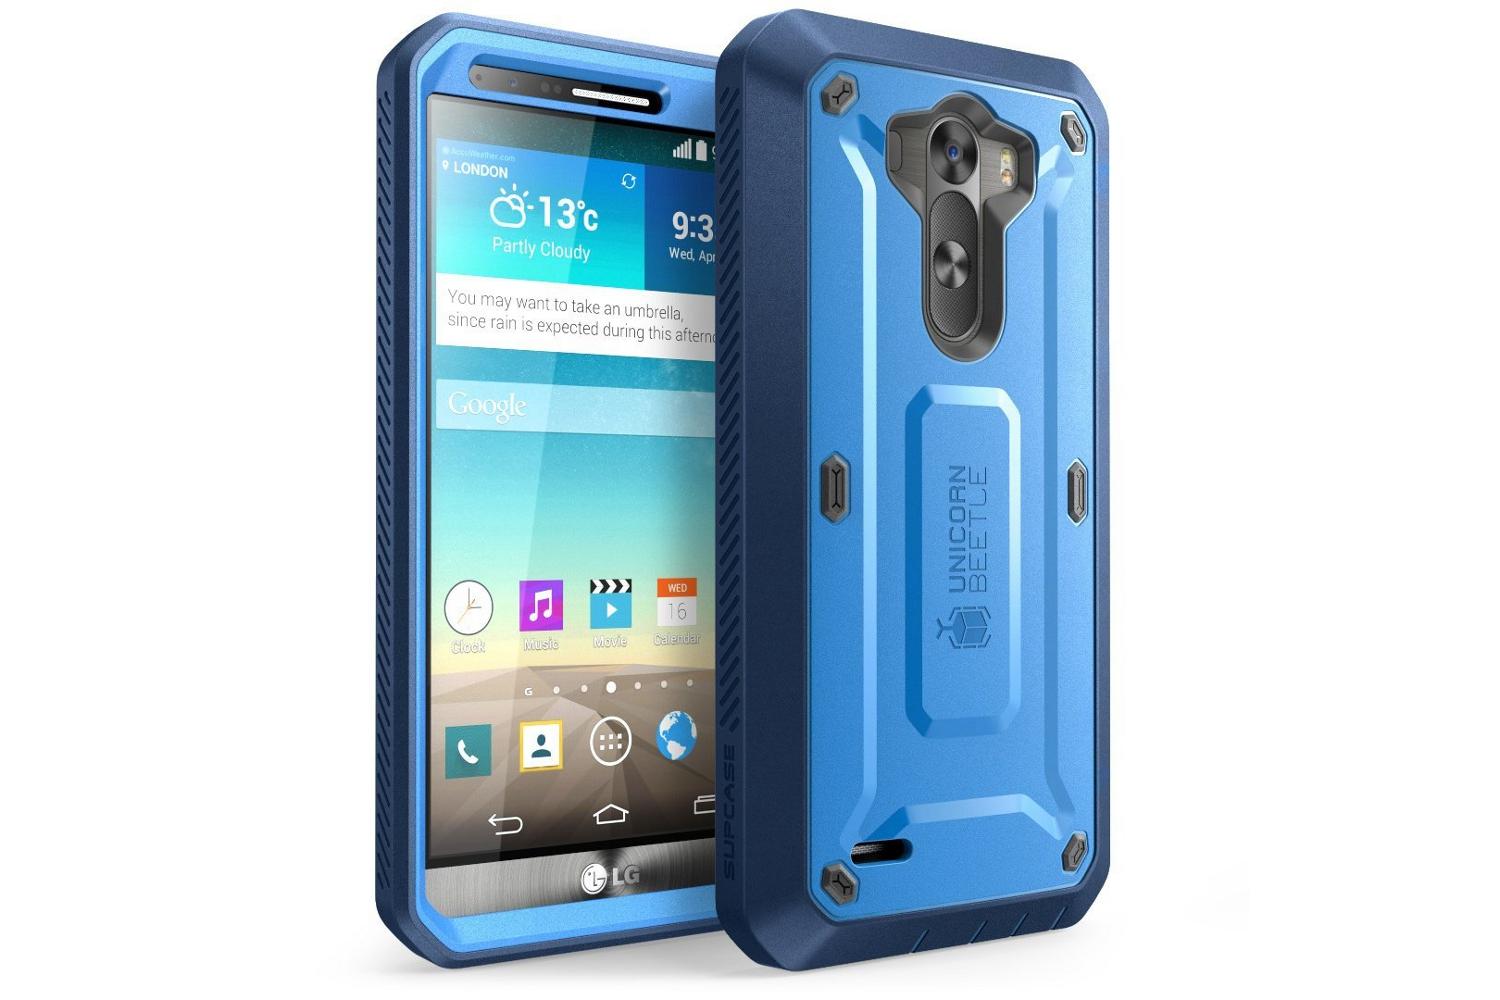 ambulance Uitbreiden bank 30 Best LG G3 Cases and Covers | Digital Trends